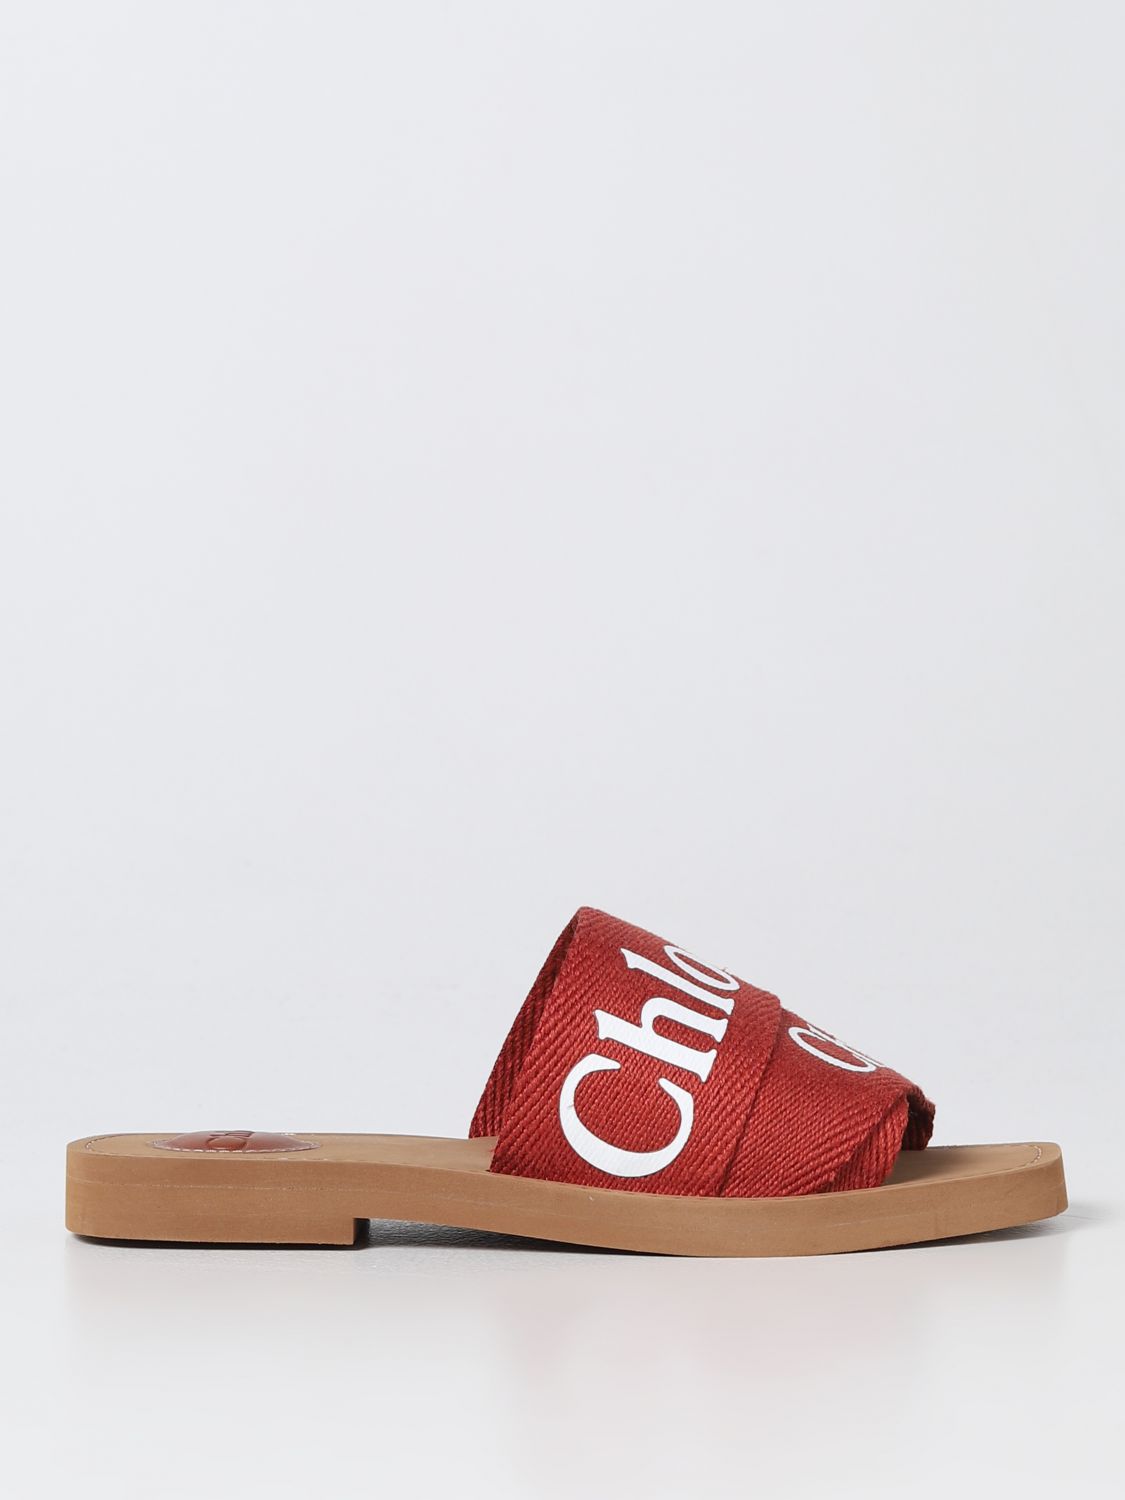 CHLOÉ SLIDERS IN FABRIC AND RUBBER,D80295264